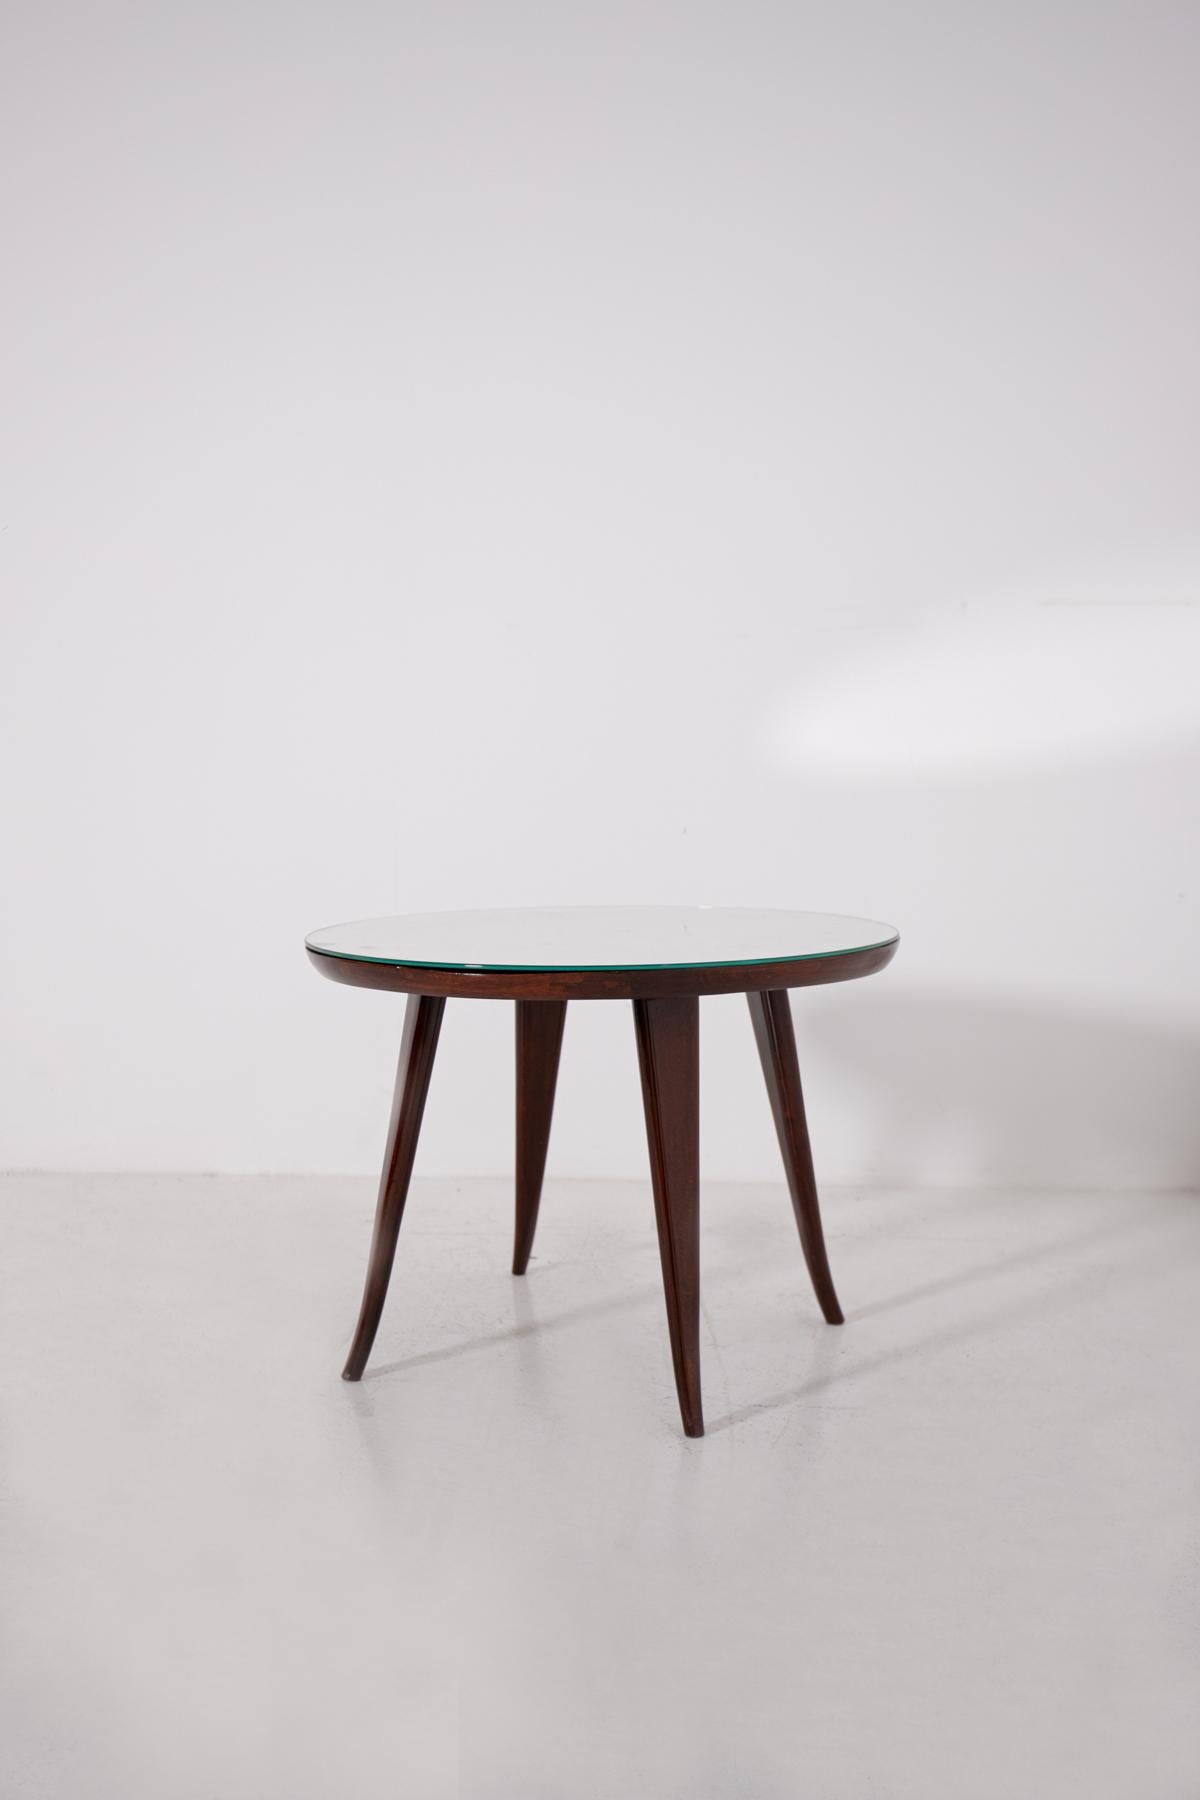 Elegant coffee table by Pietro Chiesa from the 1950s. The coffee table is made of walnut wood of excellent quality. Its four legs have in their final part a slightly curved foot. The strictly round top gives strength and elegance to its whole. The